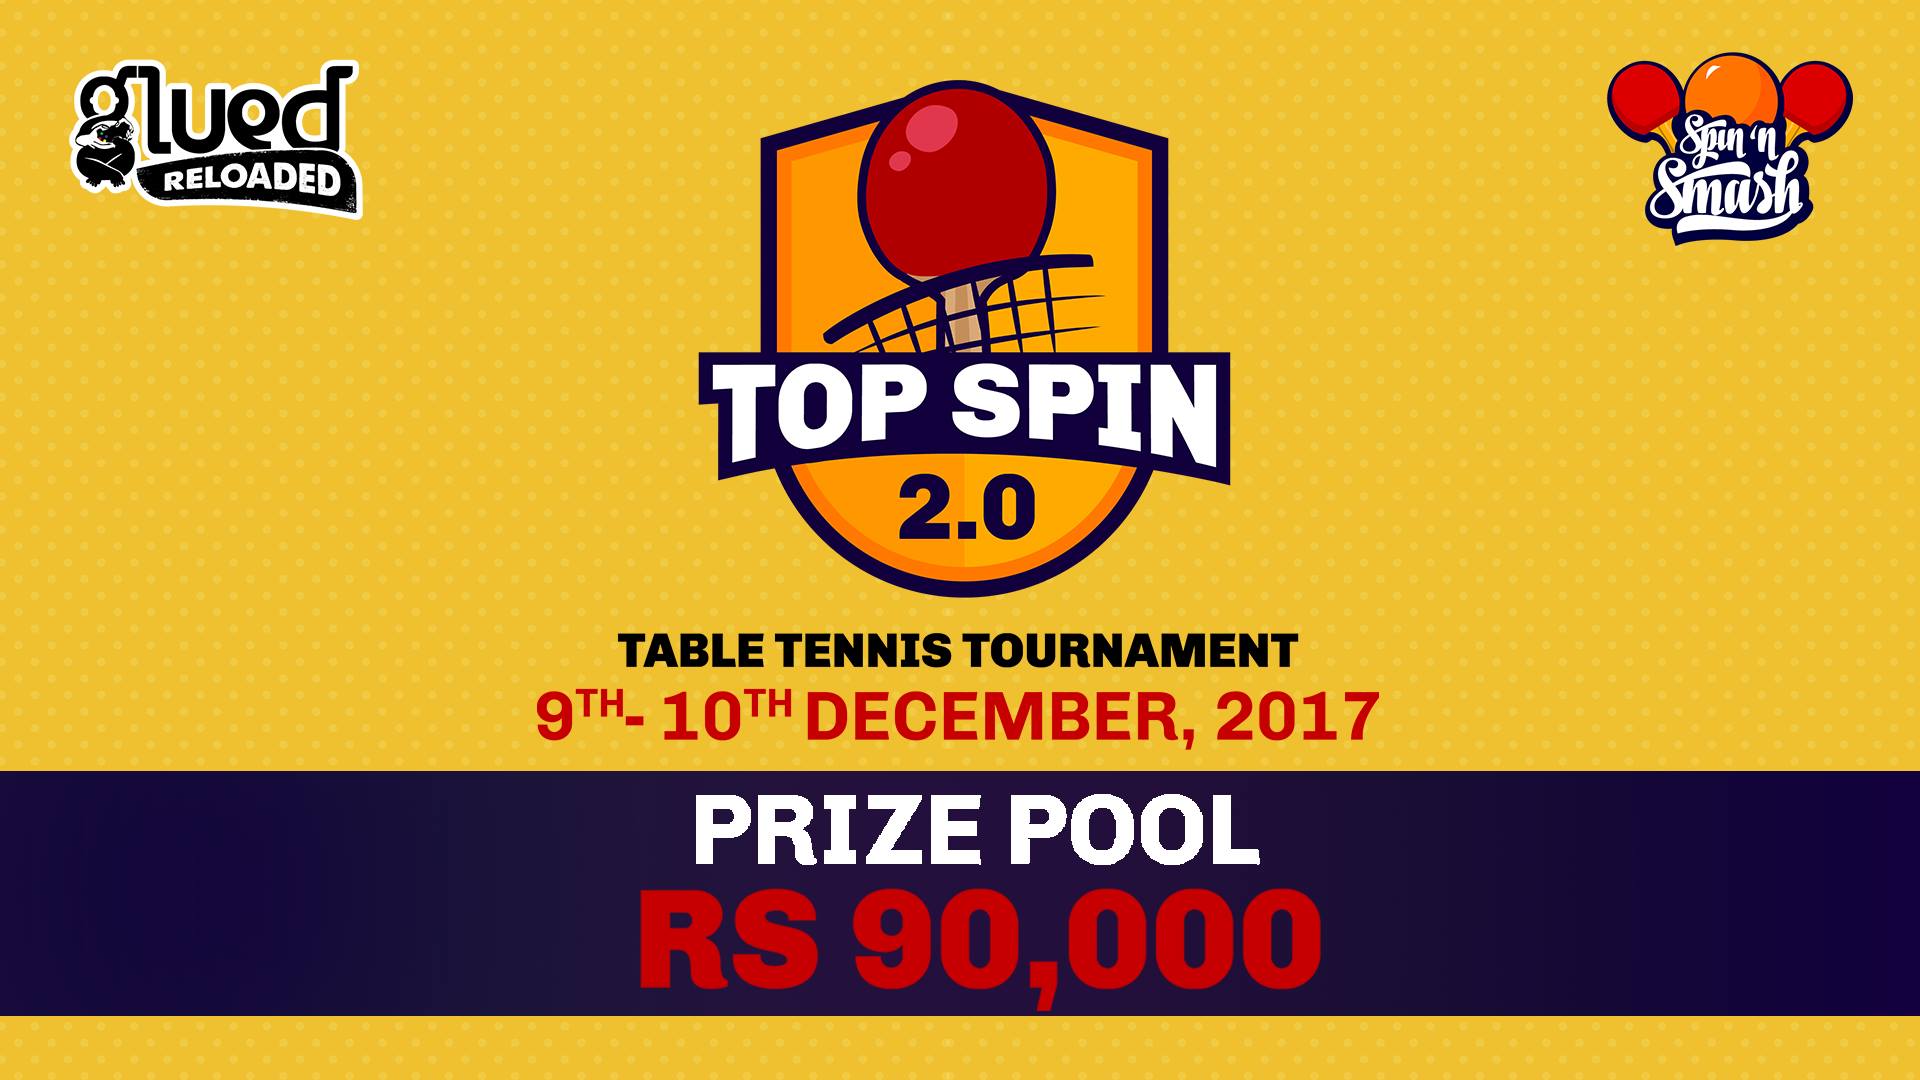 Top Spin 2.0 Table Tennis Tournament